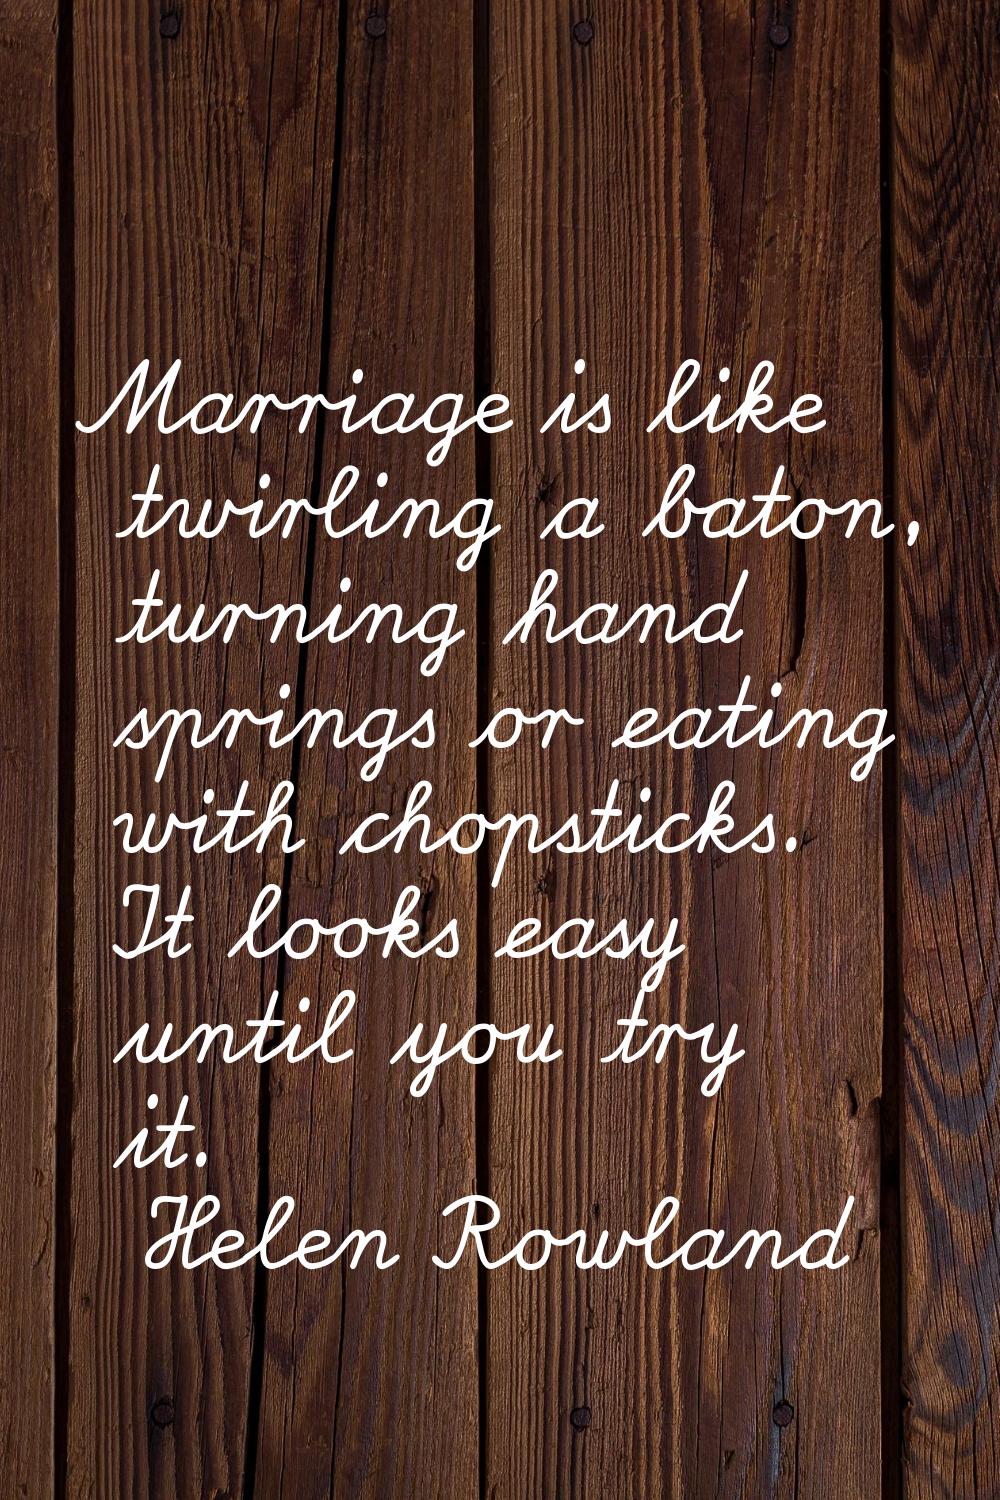 Marriage is like twirling a baton, turning hand springs or eating with chopsticks. It looks easy un